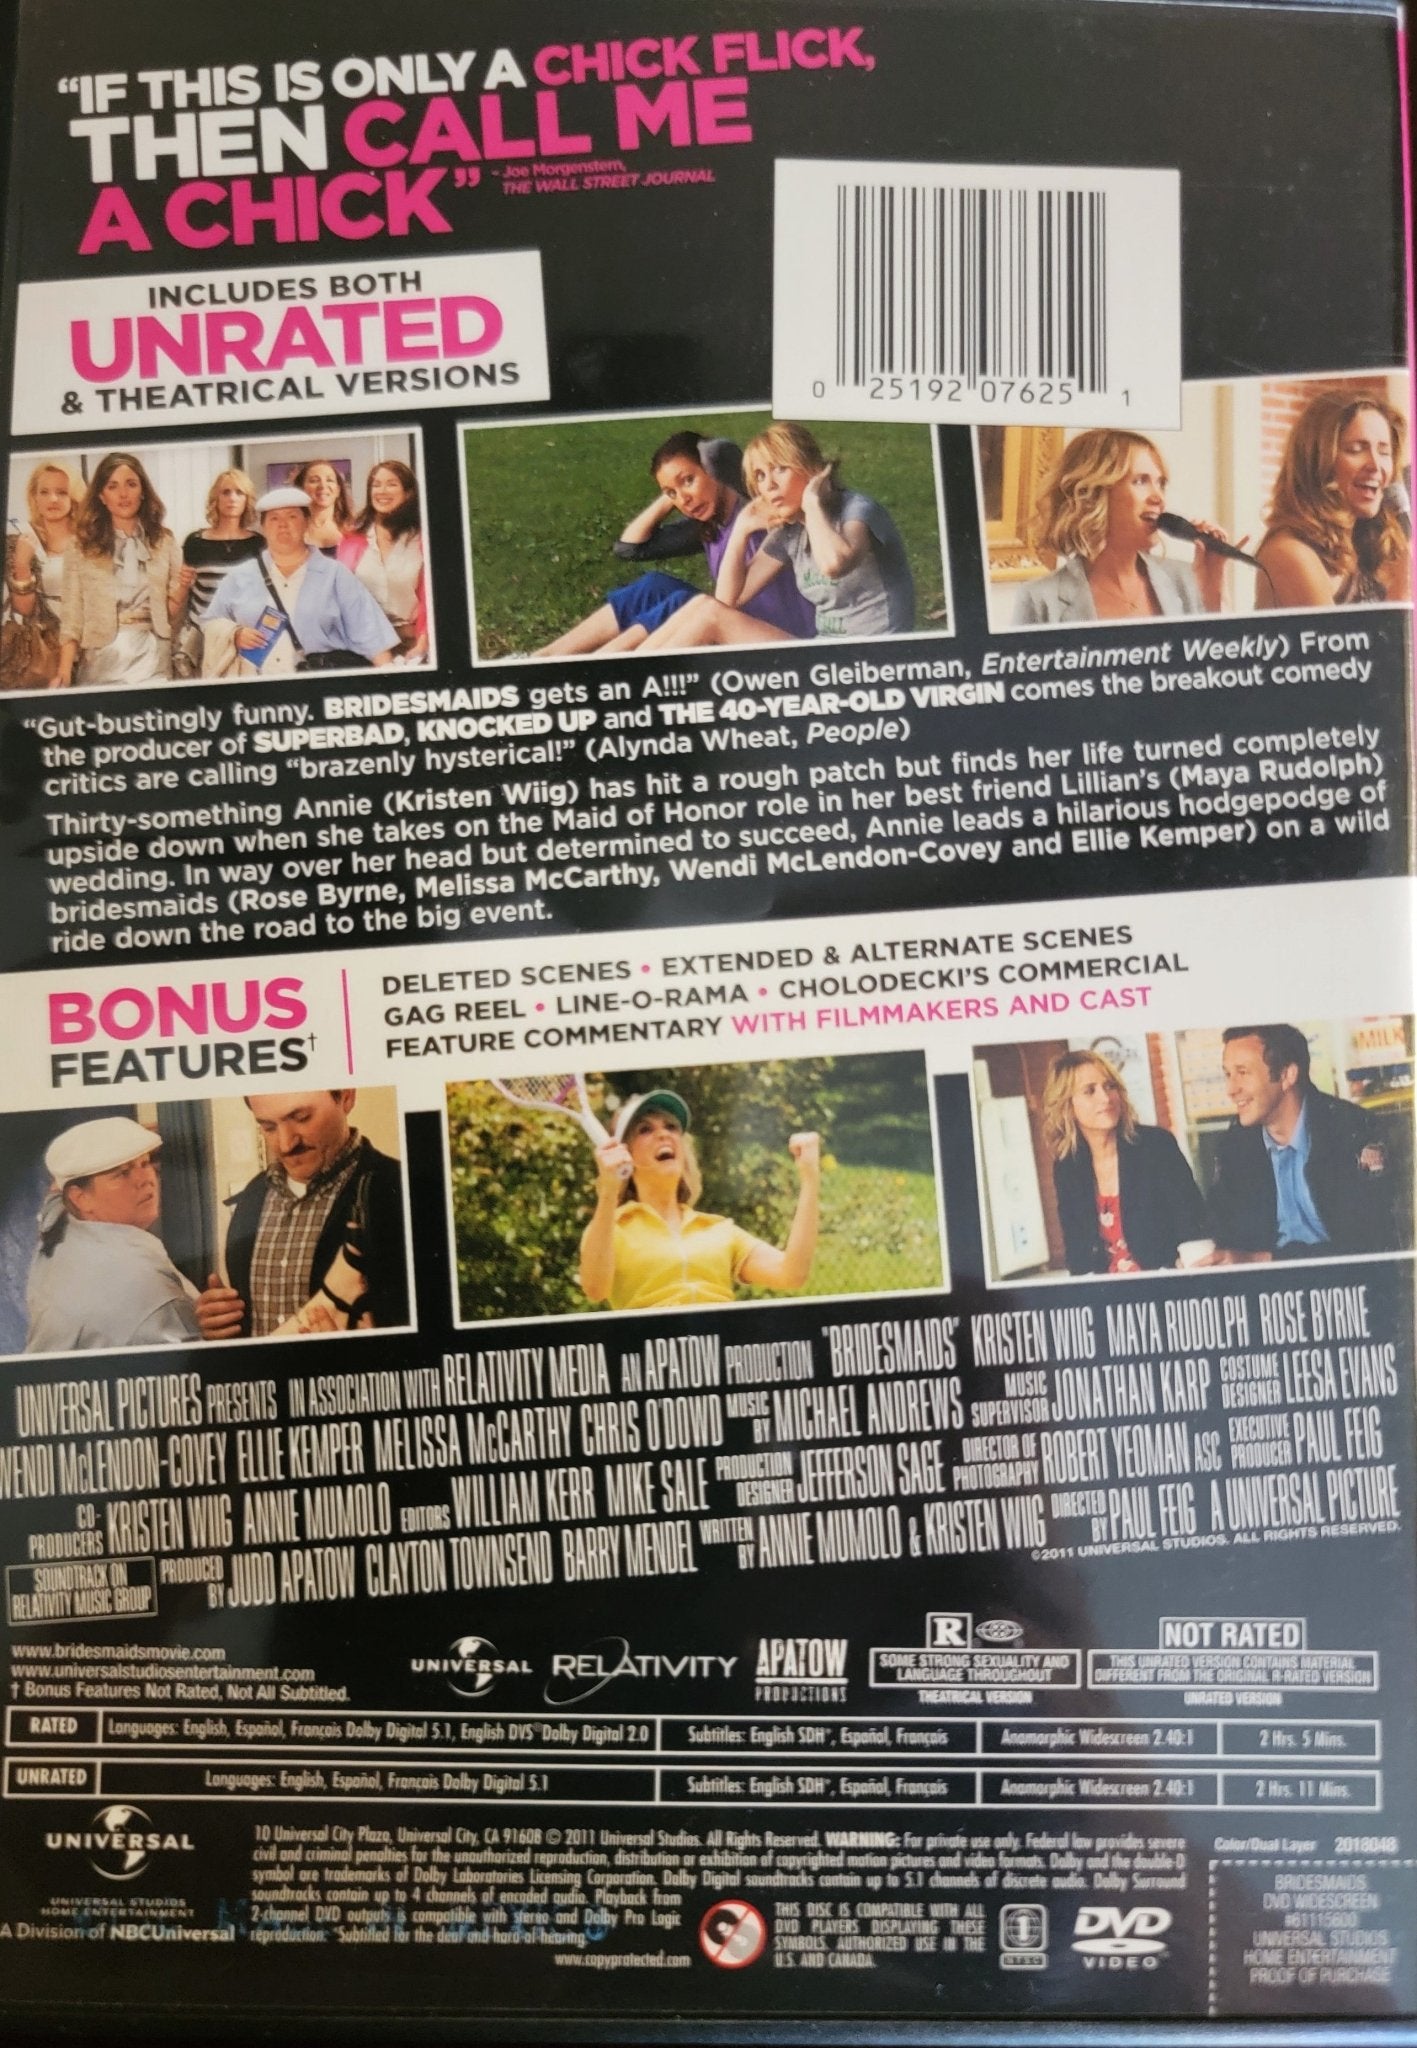 Universal Pictures Home Entertainment - Brides Maids Unrated | DVD | Widescreen - DVD - Steady Bunny Shop